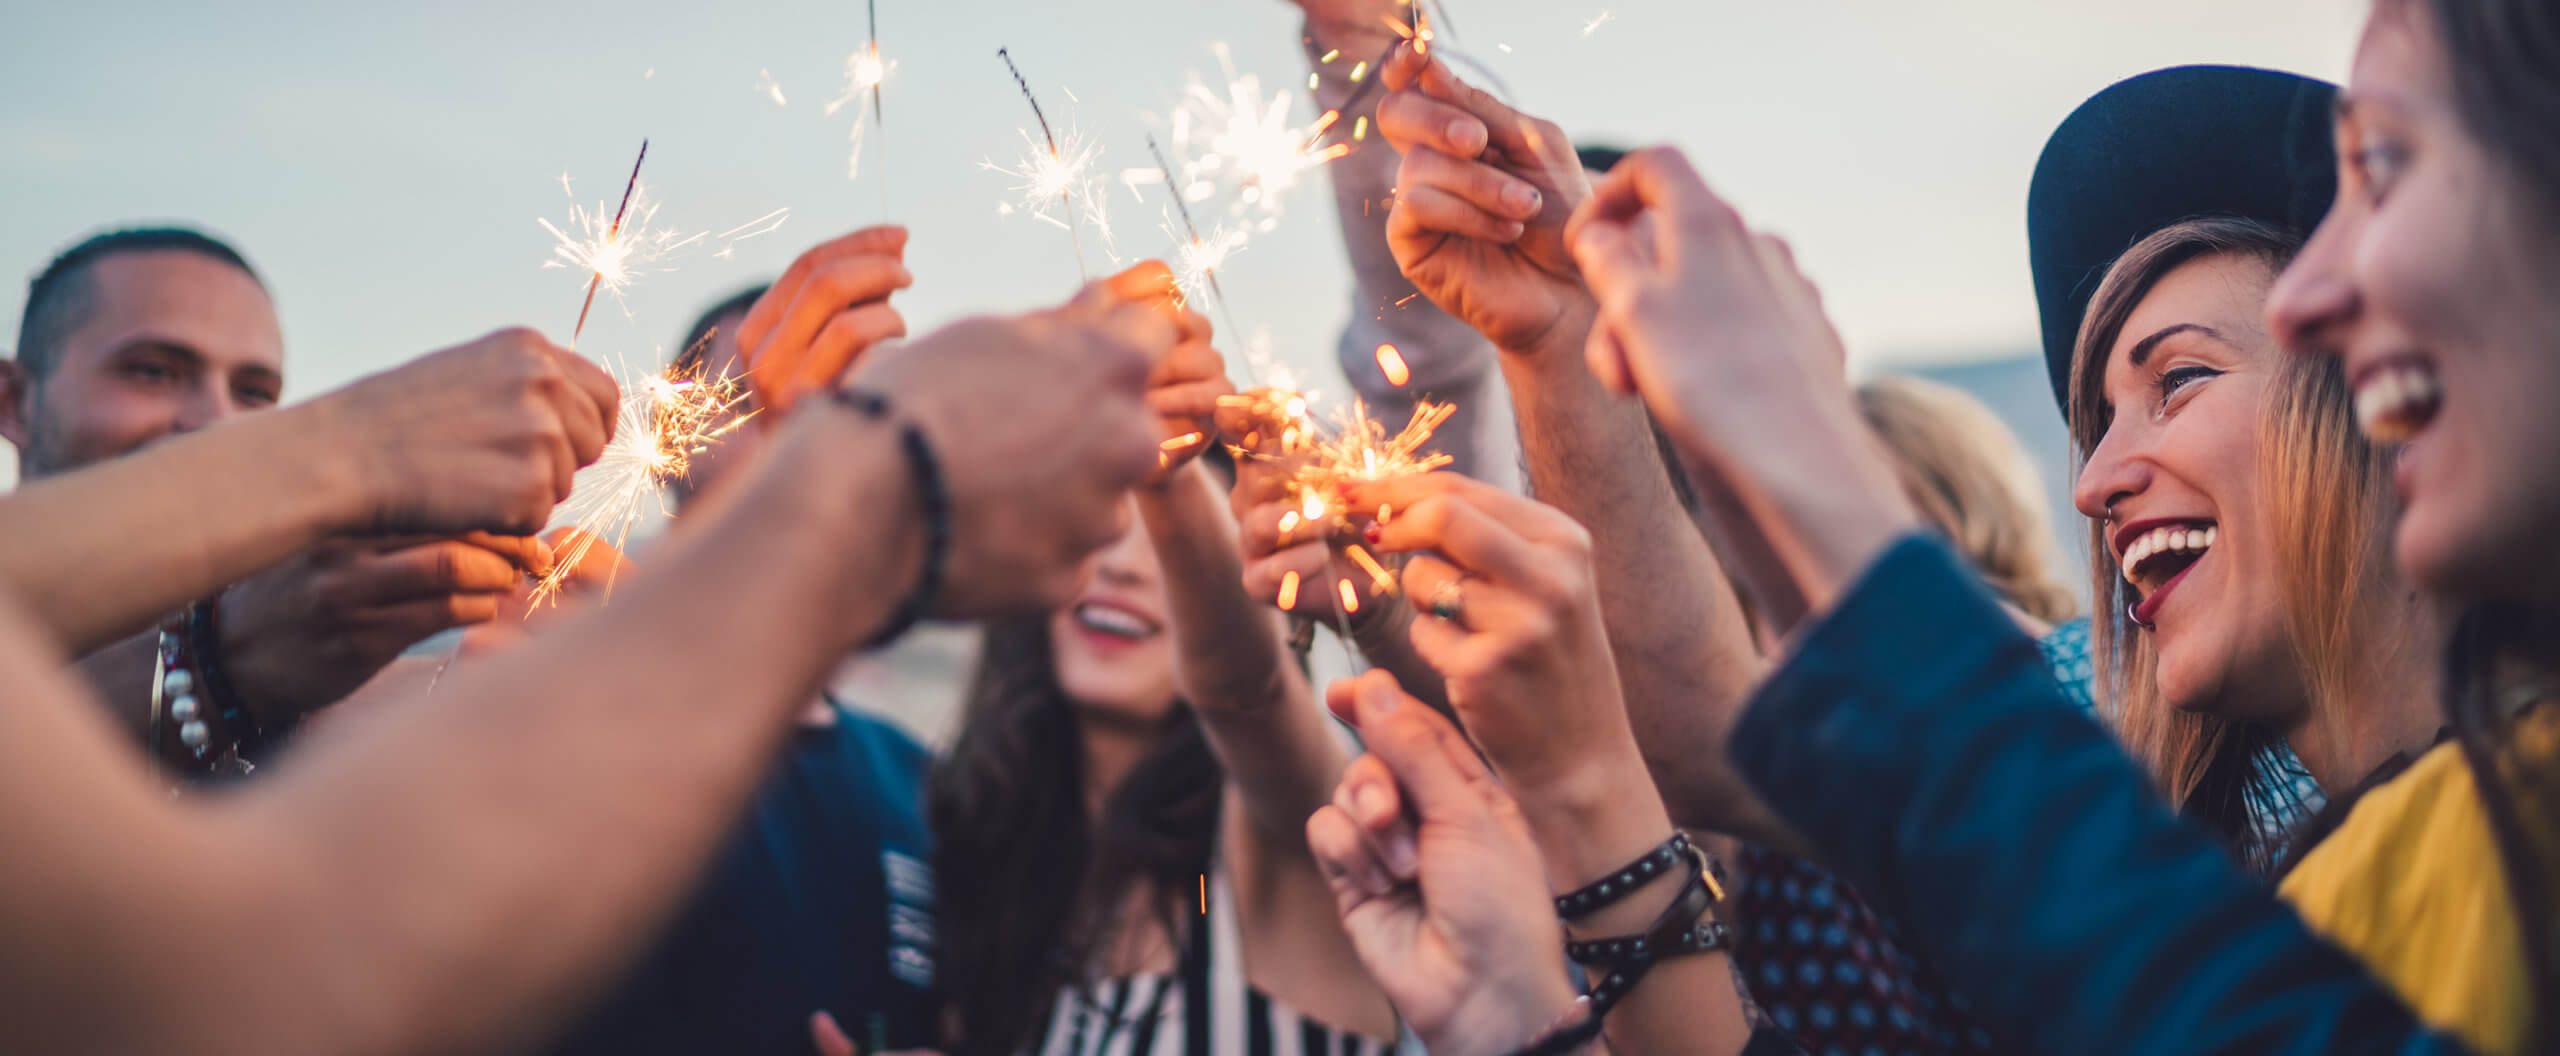 Image of people celebrating with sparklers